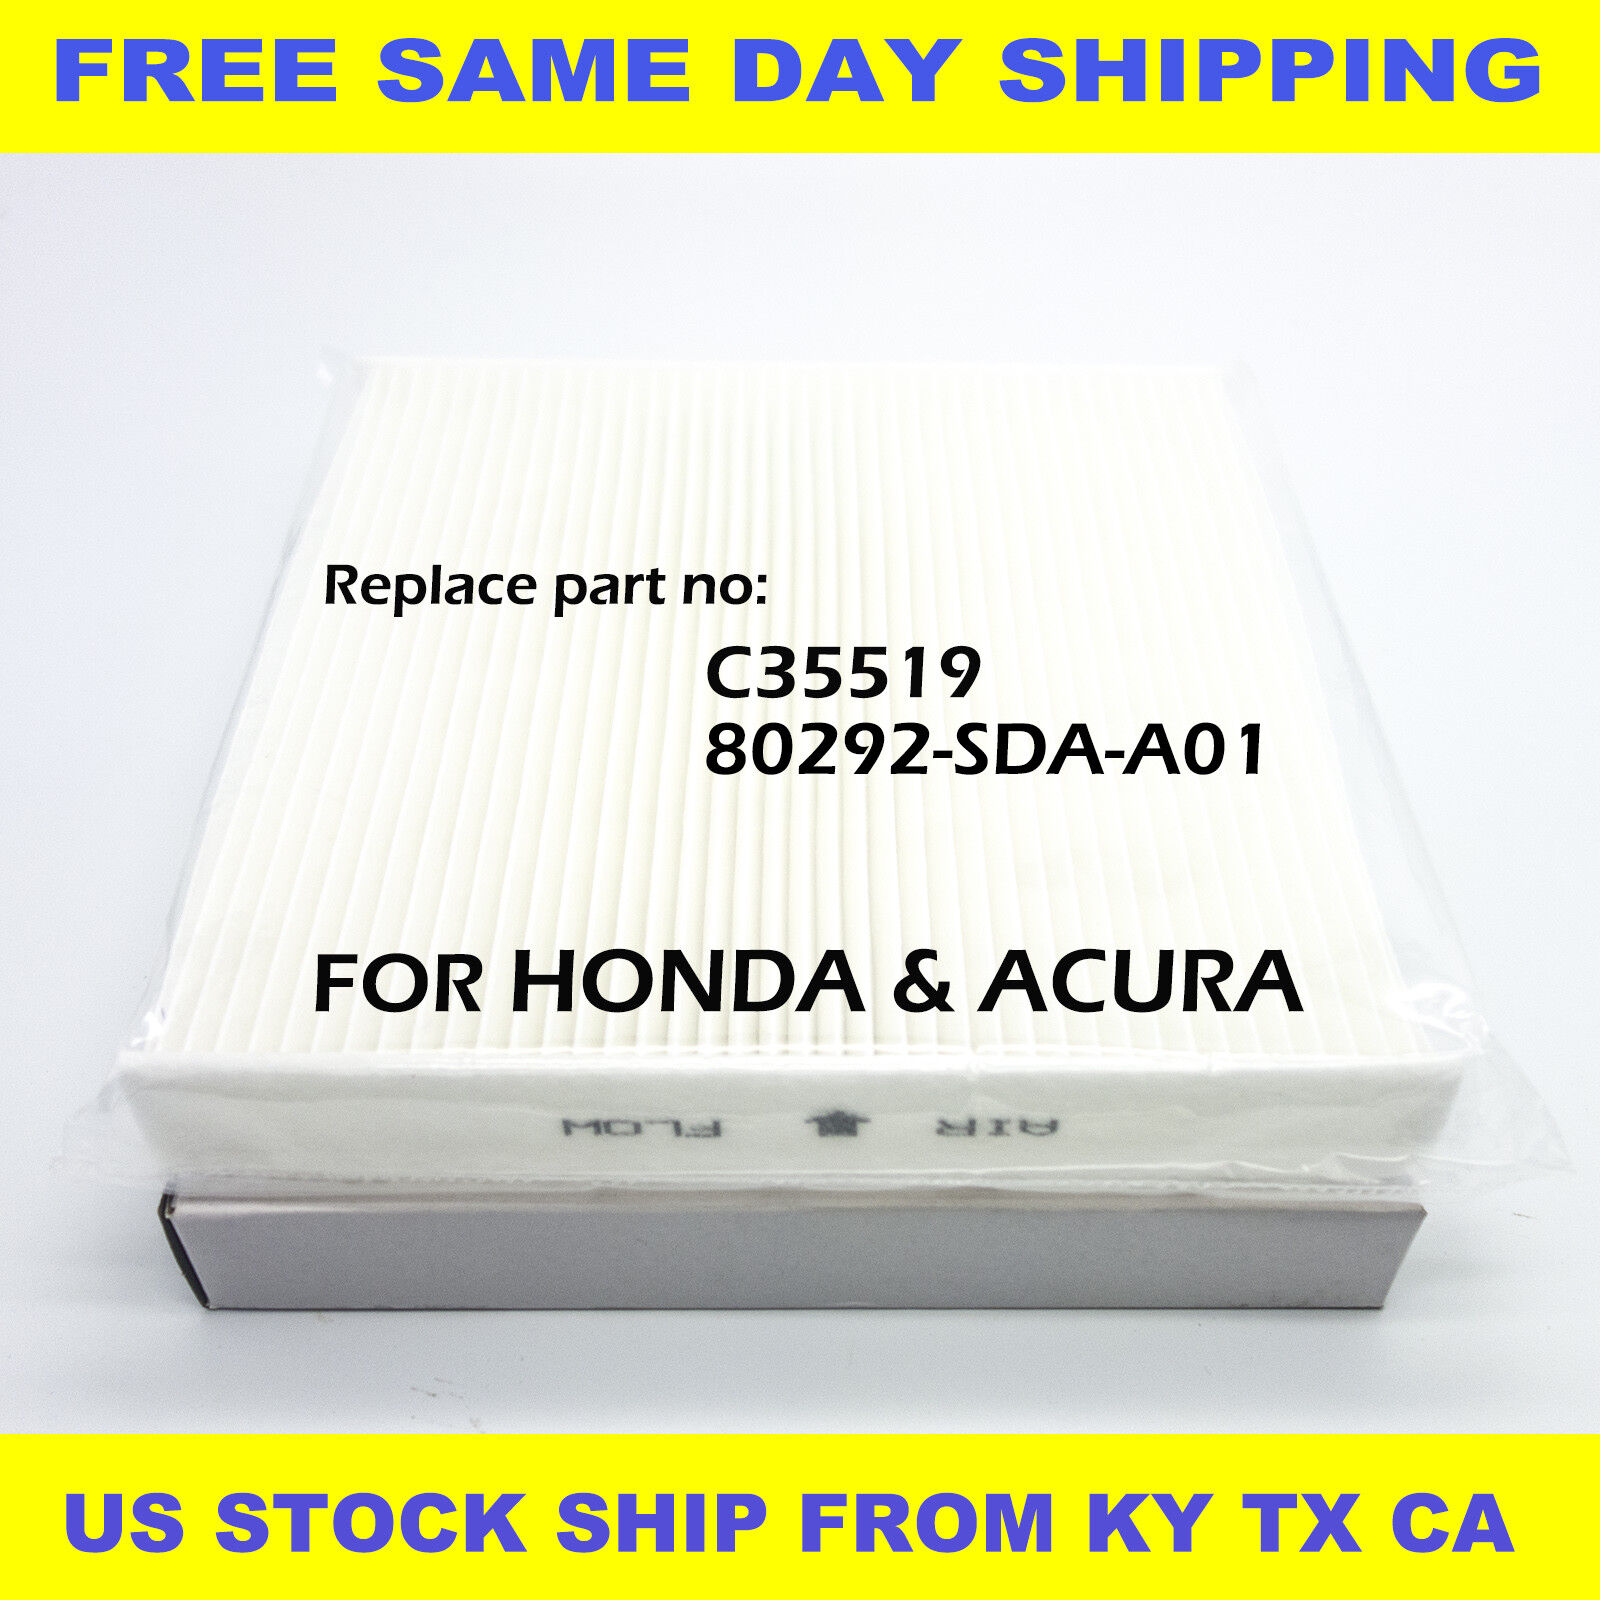 CABIN AIR FILTER For HONDA ACCORD Acura Civic CRV Odyssey C35519 HIGH QUALITY US